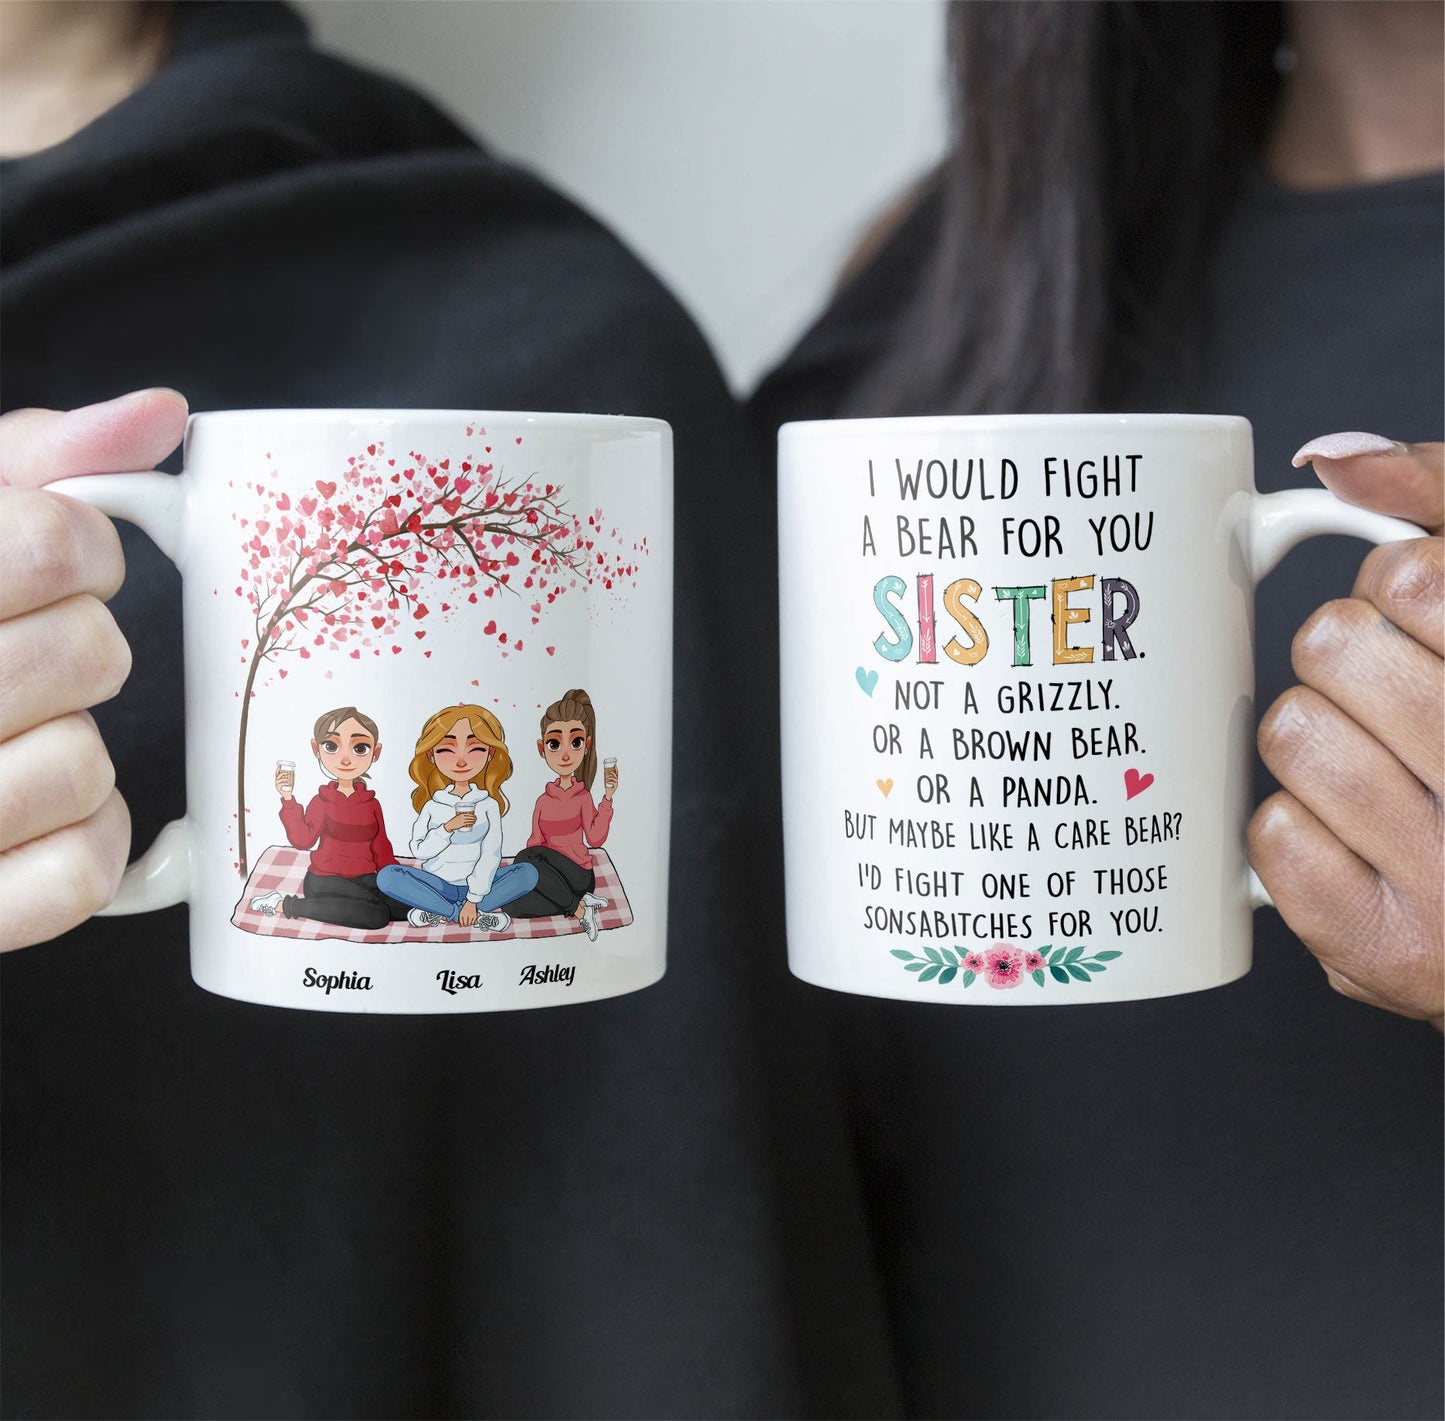 I Would Fight A Bear For You Sister - Personalized Mug